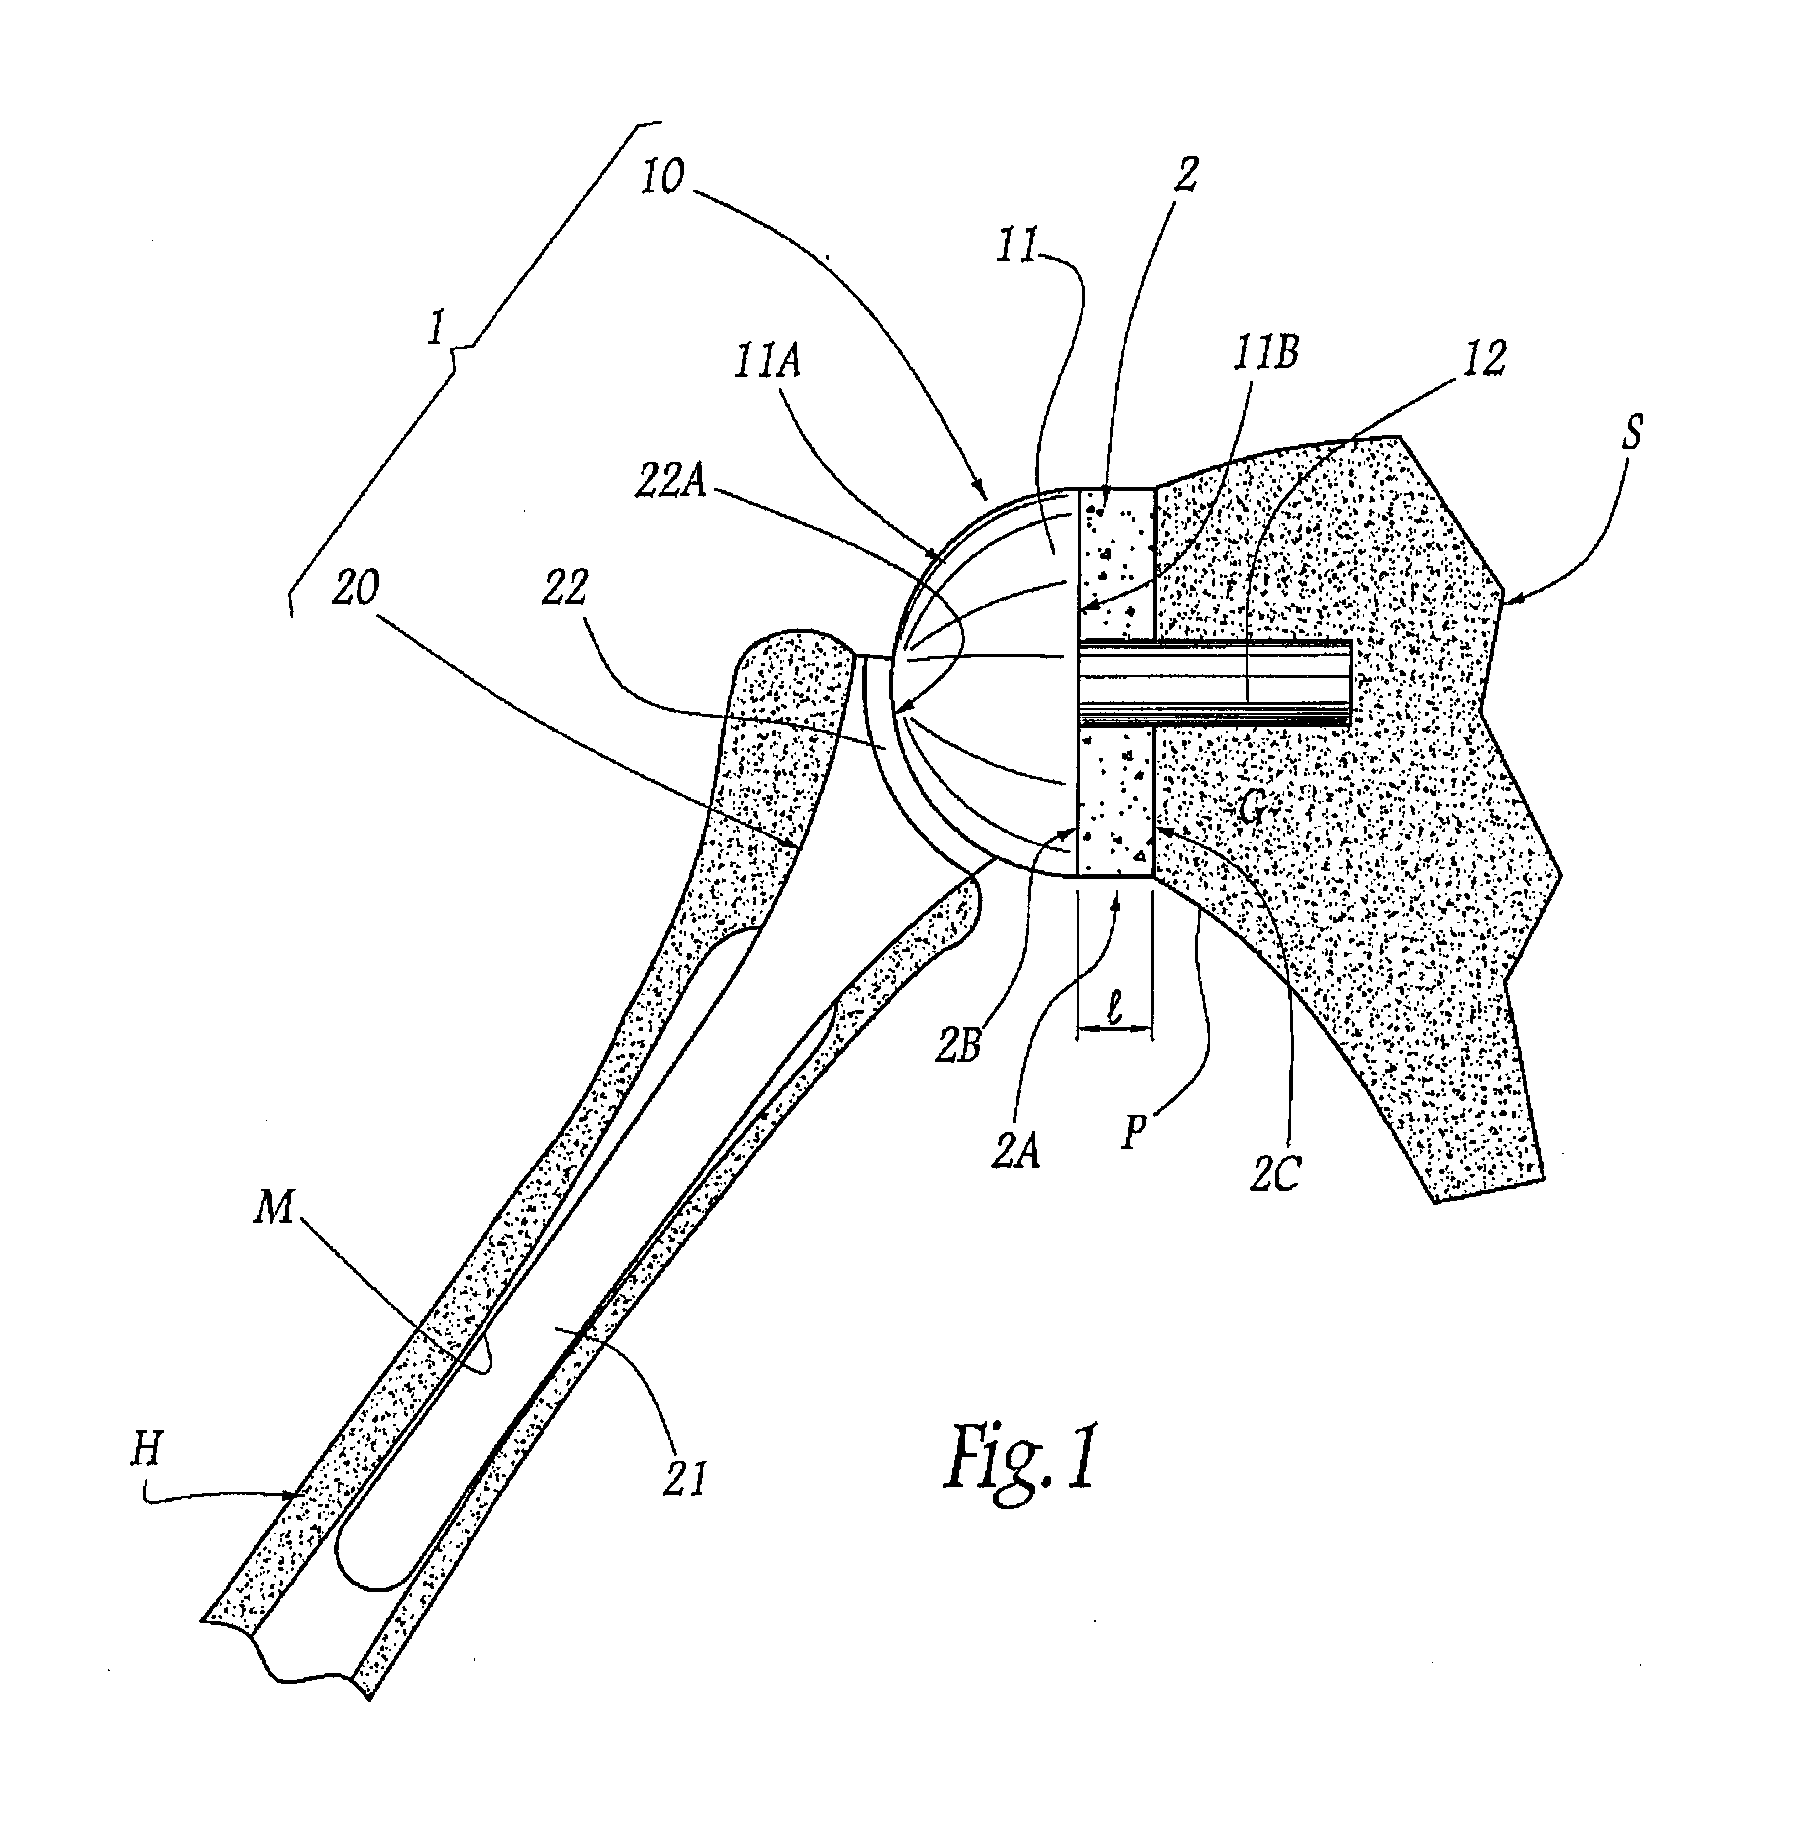 Apparatus for fitting a shoulder prosthesis